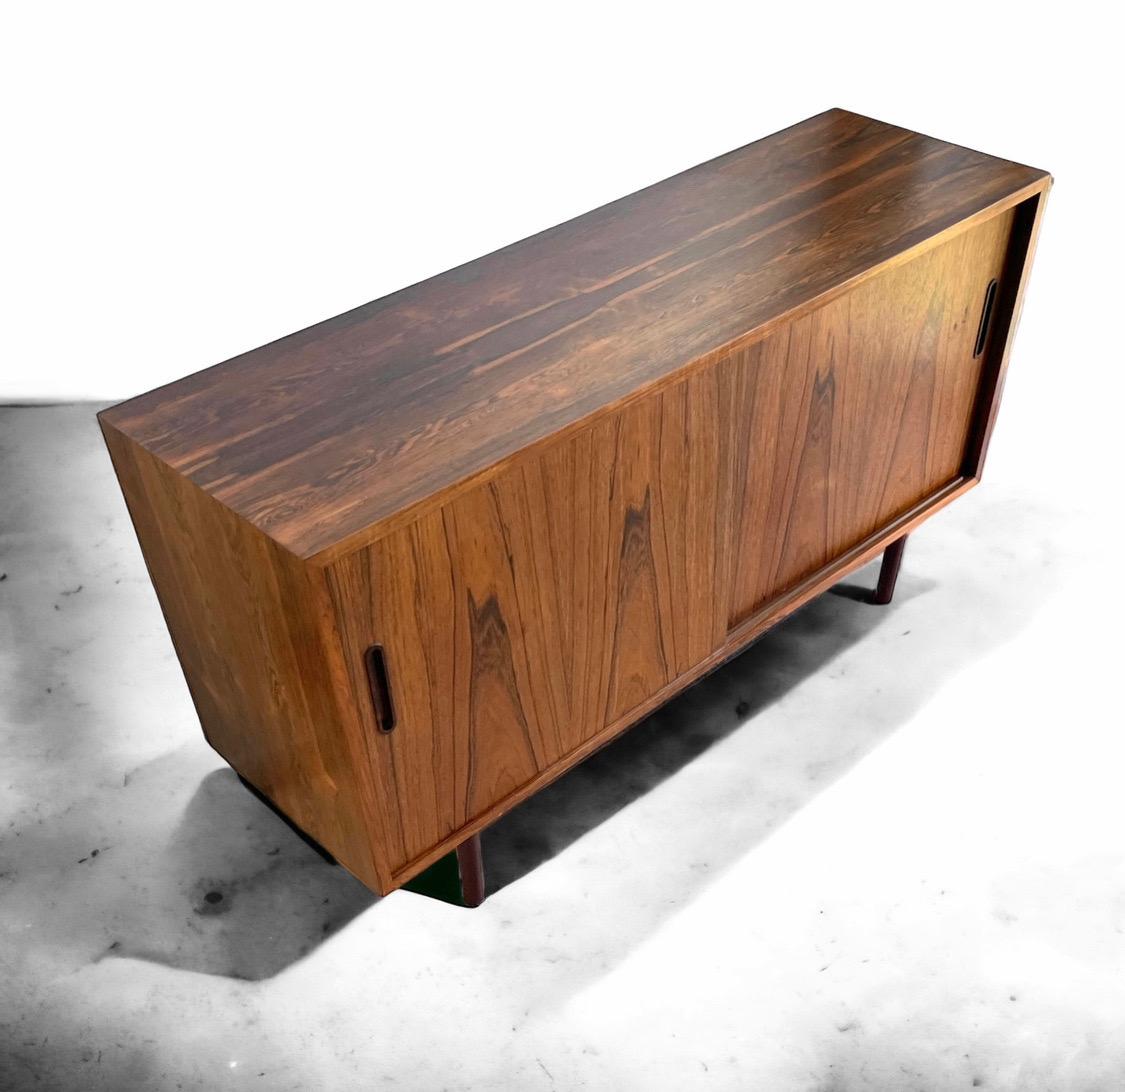 Scandinavian Modern Danish Credenza by Poul Hundavad from Hundevad & Co For Sale